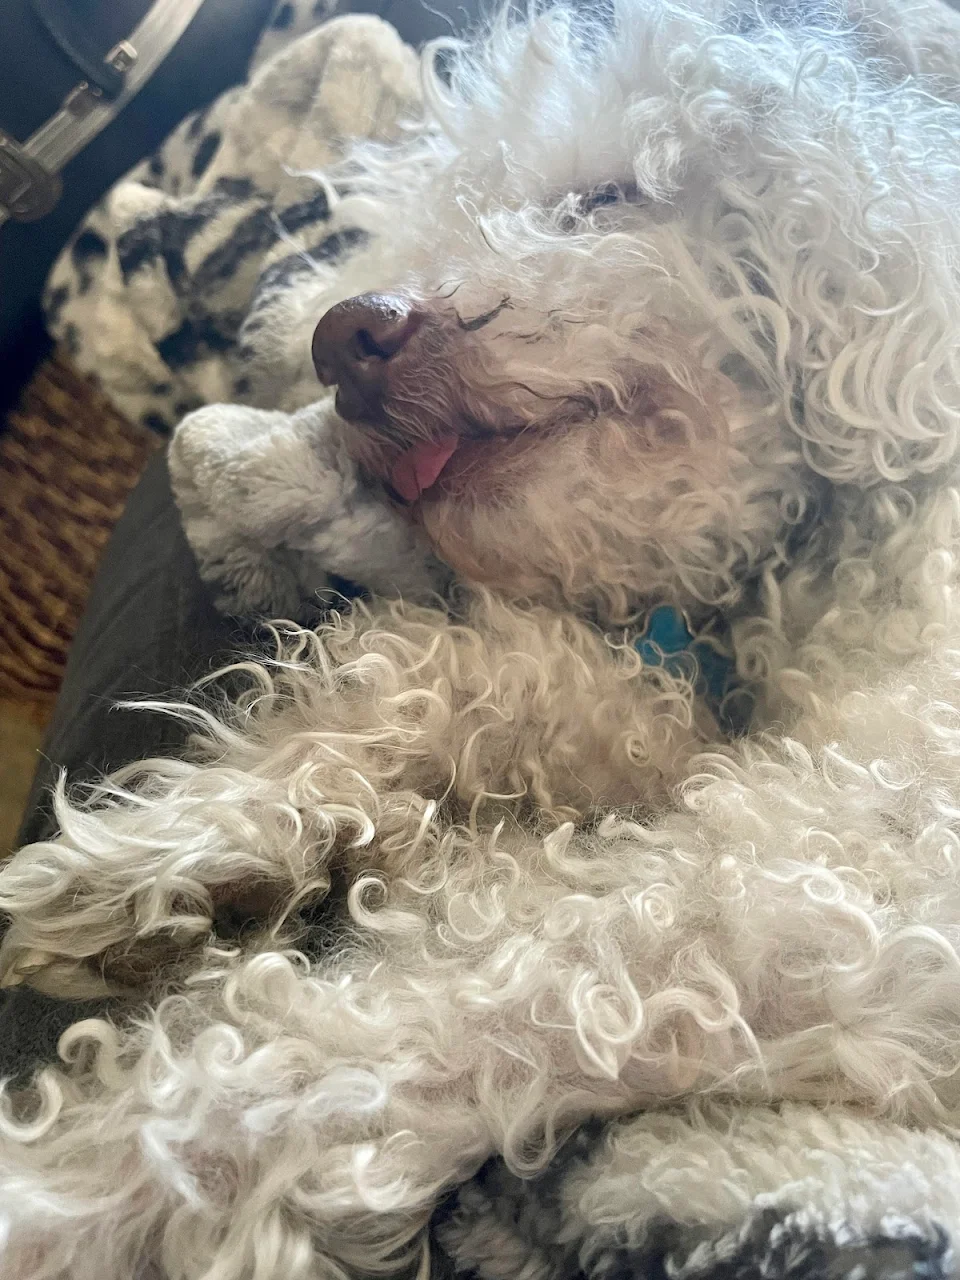 [OC] His tongue sticks out when he’s sleeping hard